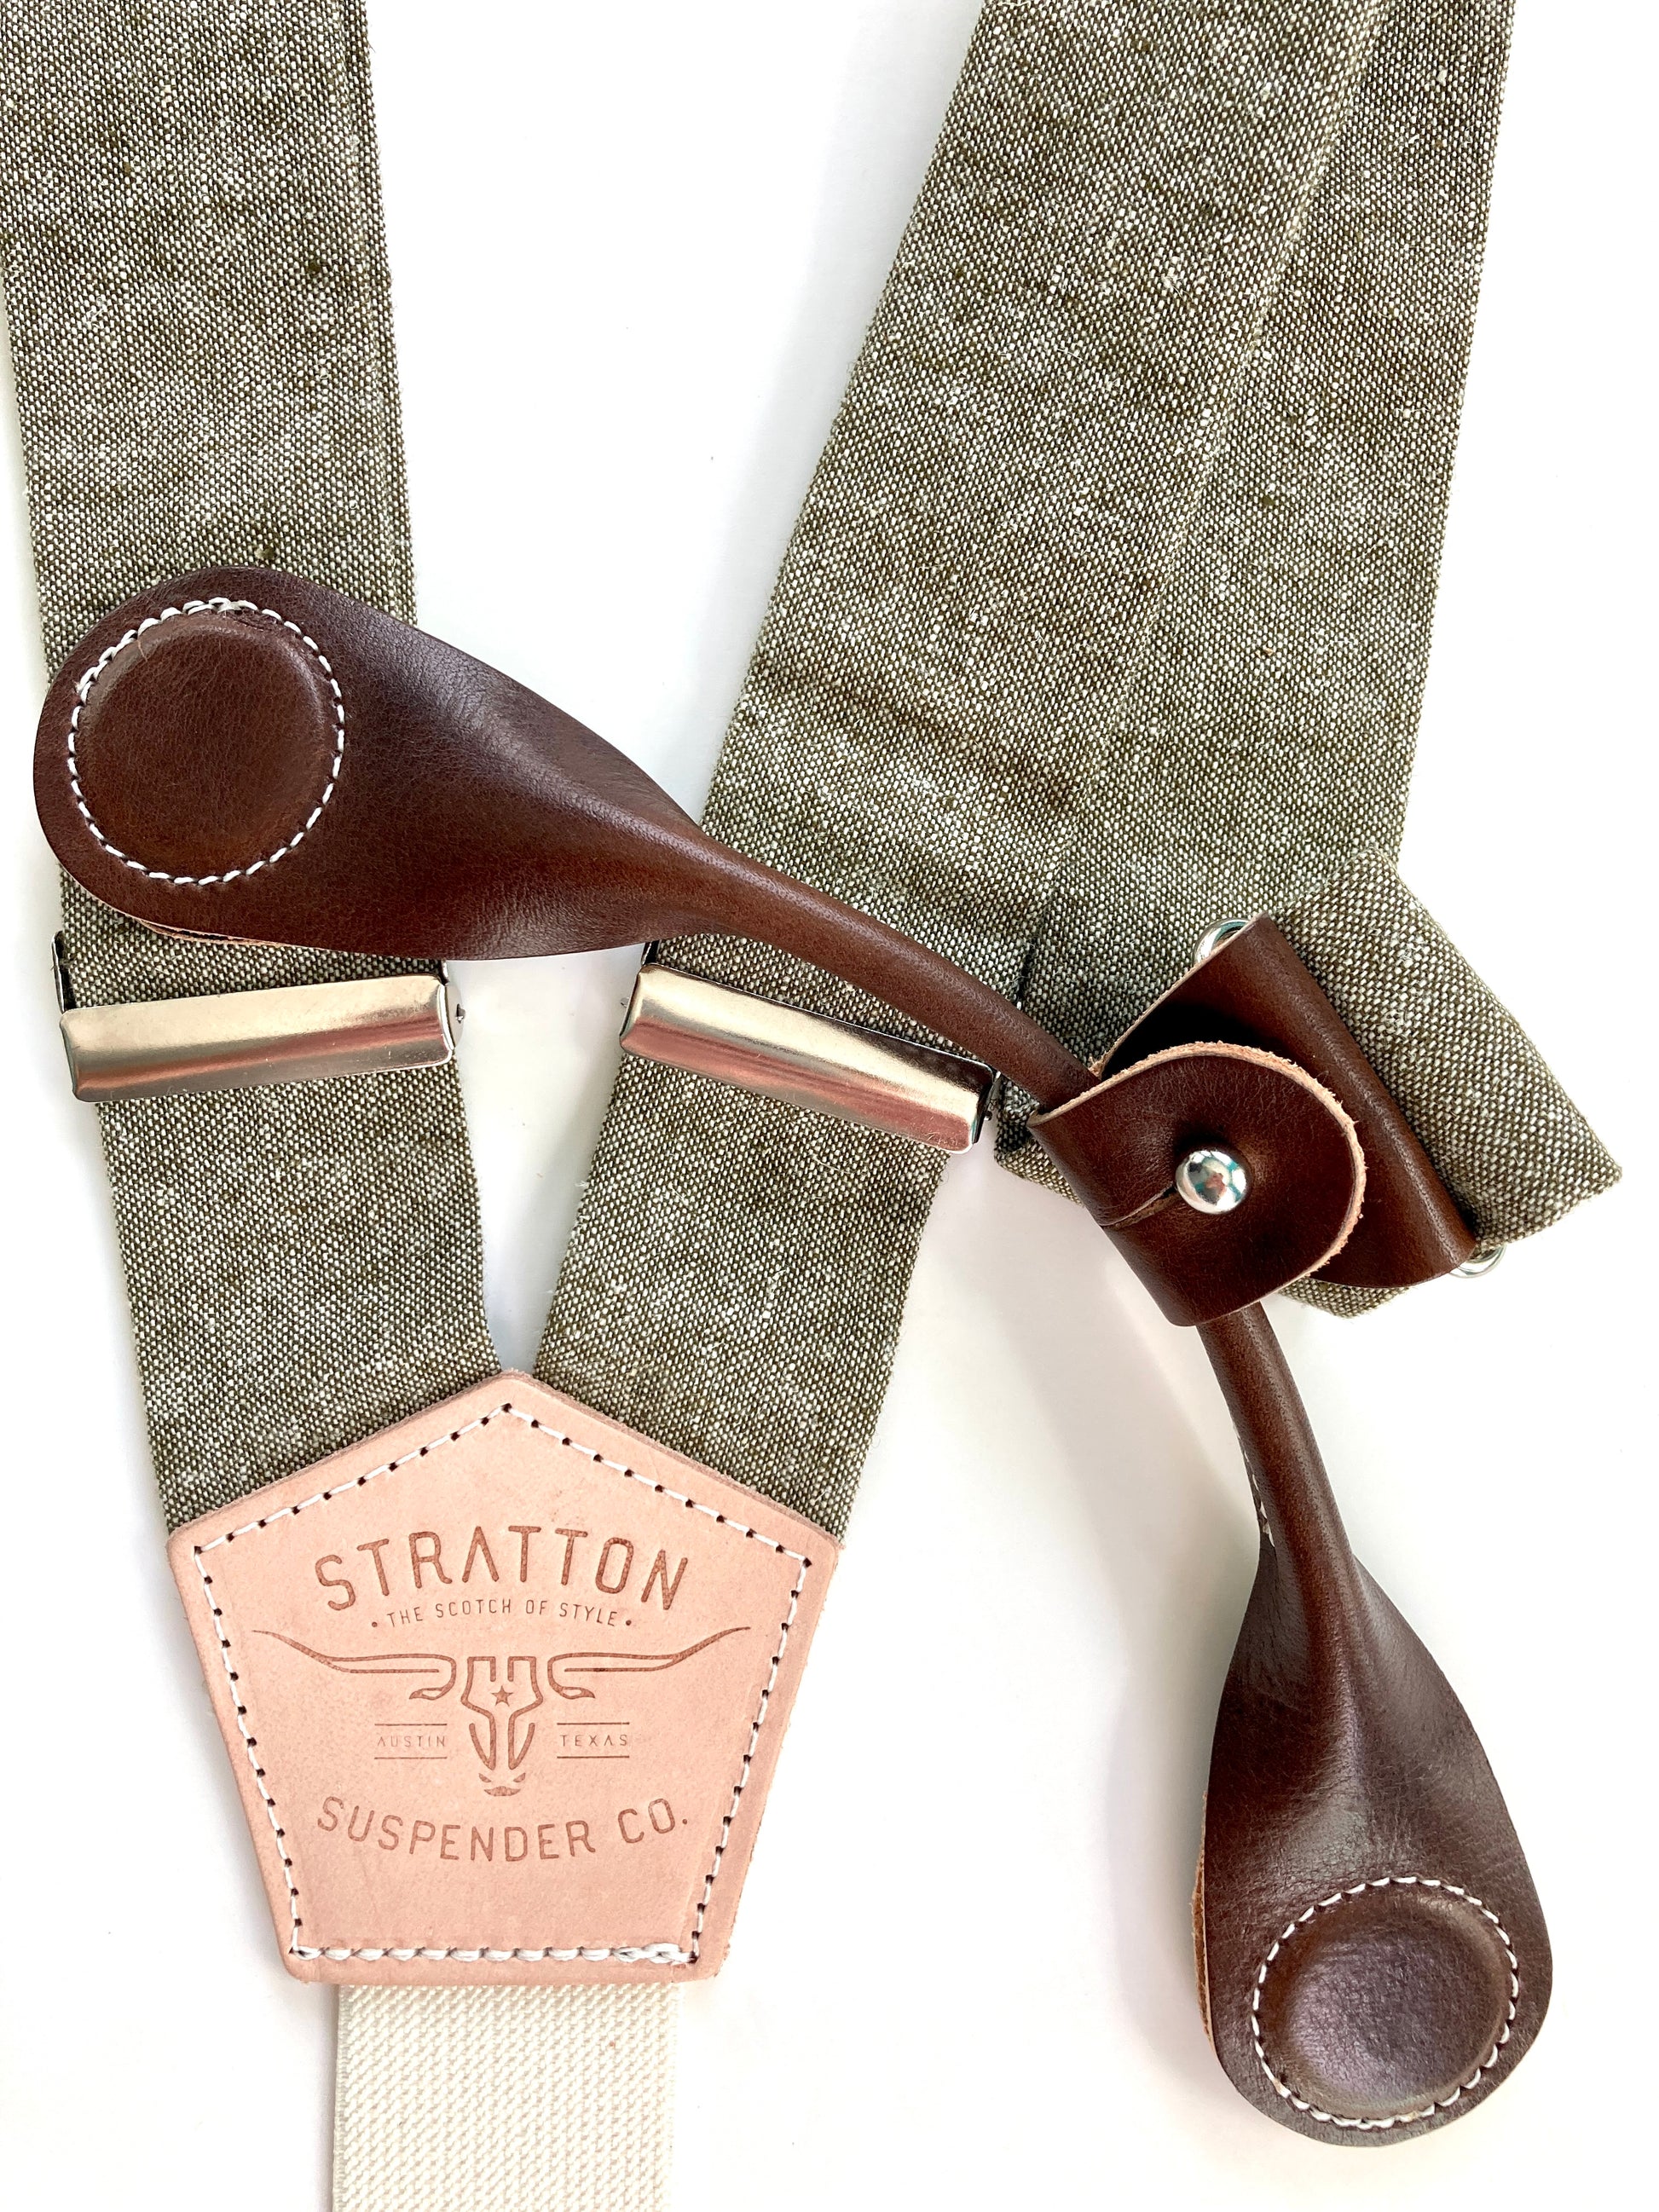 Stratton Suspender Co. features the Olive Green linen suspenders on veg tan shoulder leather with cream colored elastic back strap for the Fall 2022 suspenders collection Magnetic Stratton Suspender clasps in Chocolate Pontedero Italian leather hand-picked by Stratton Suspender Co.